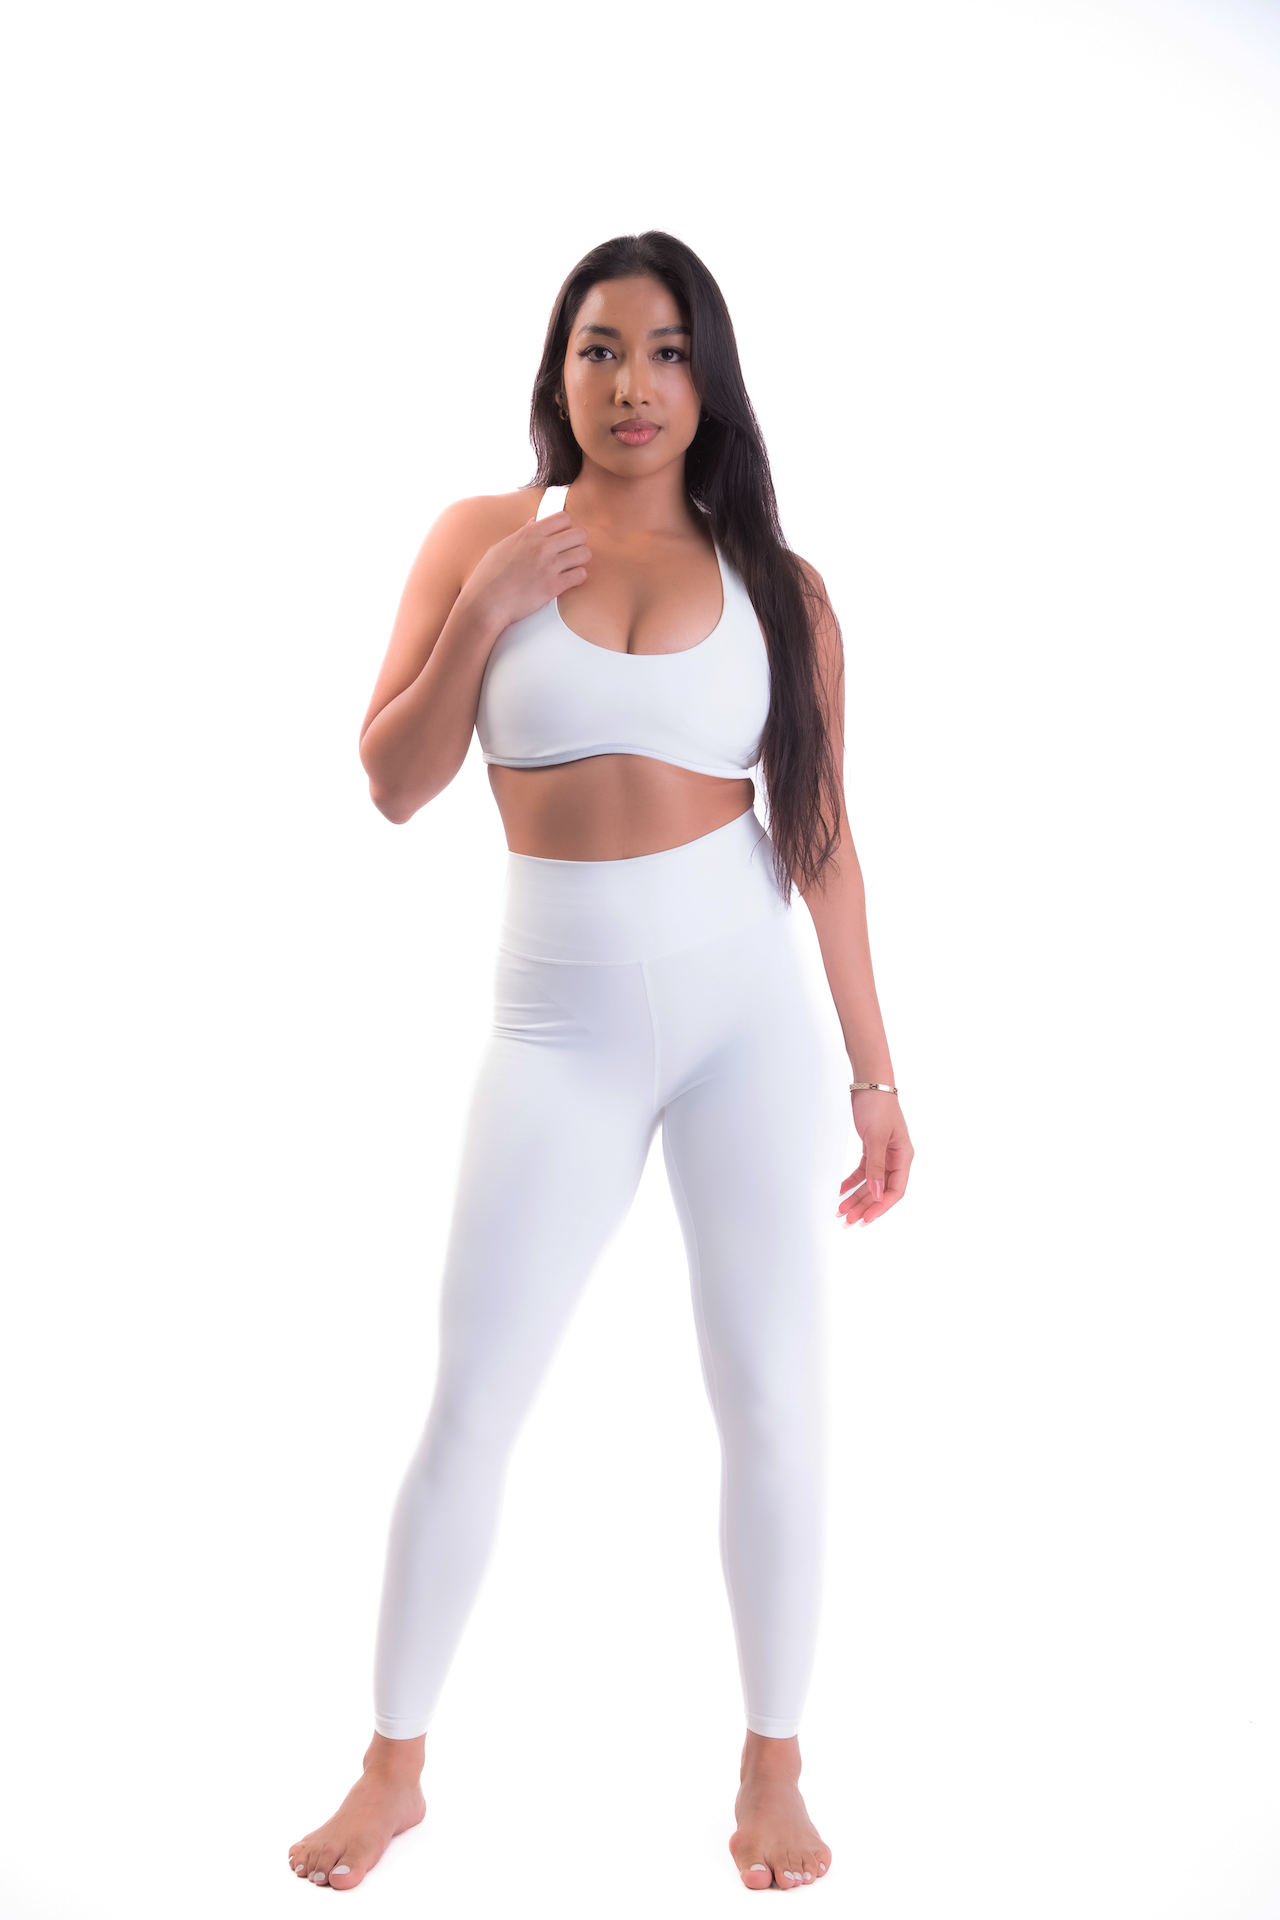 Alo Yoga Ivory Workout Clothes, Bras, Leggings Review